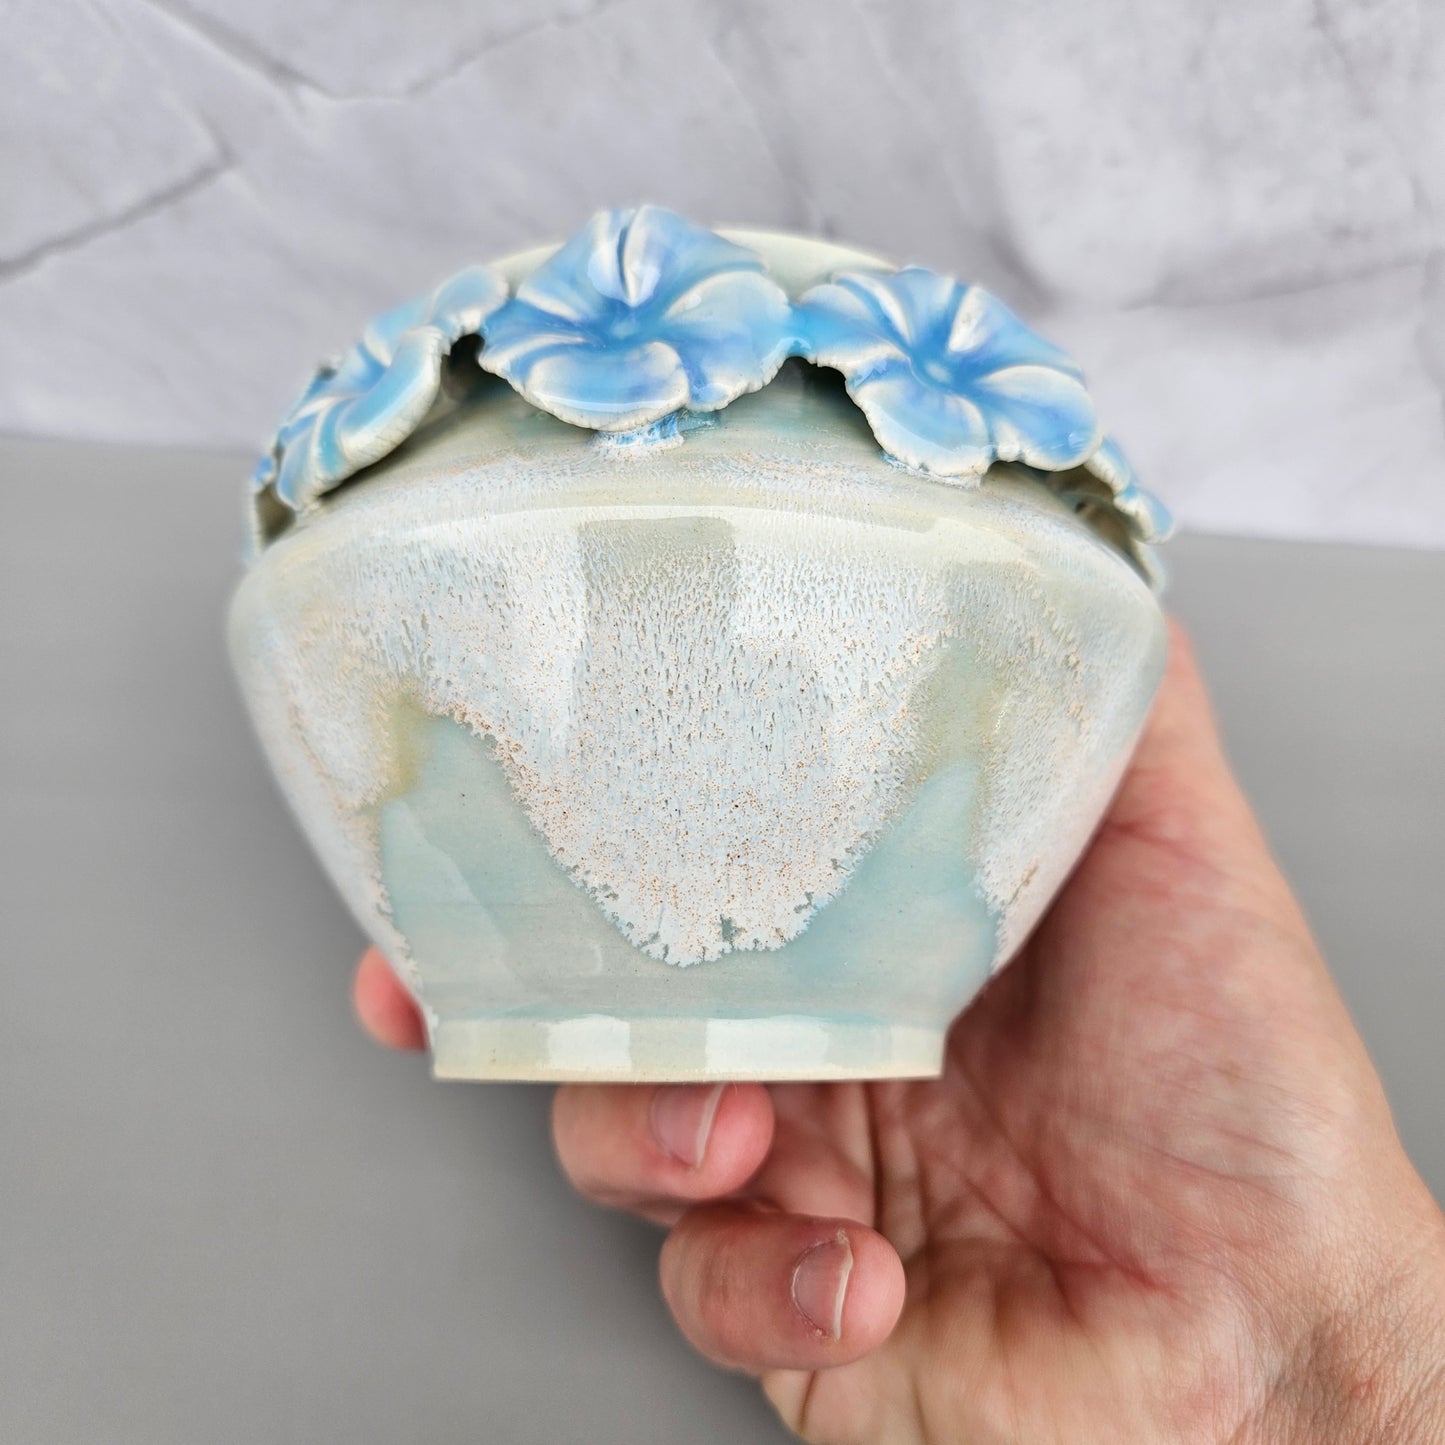 Light blue and white marbled mini-vase, 3 inches high